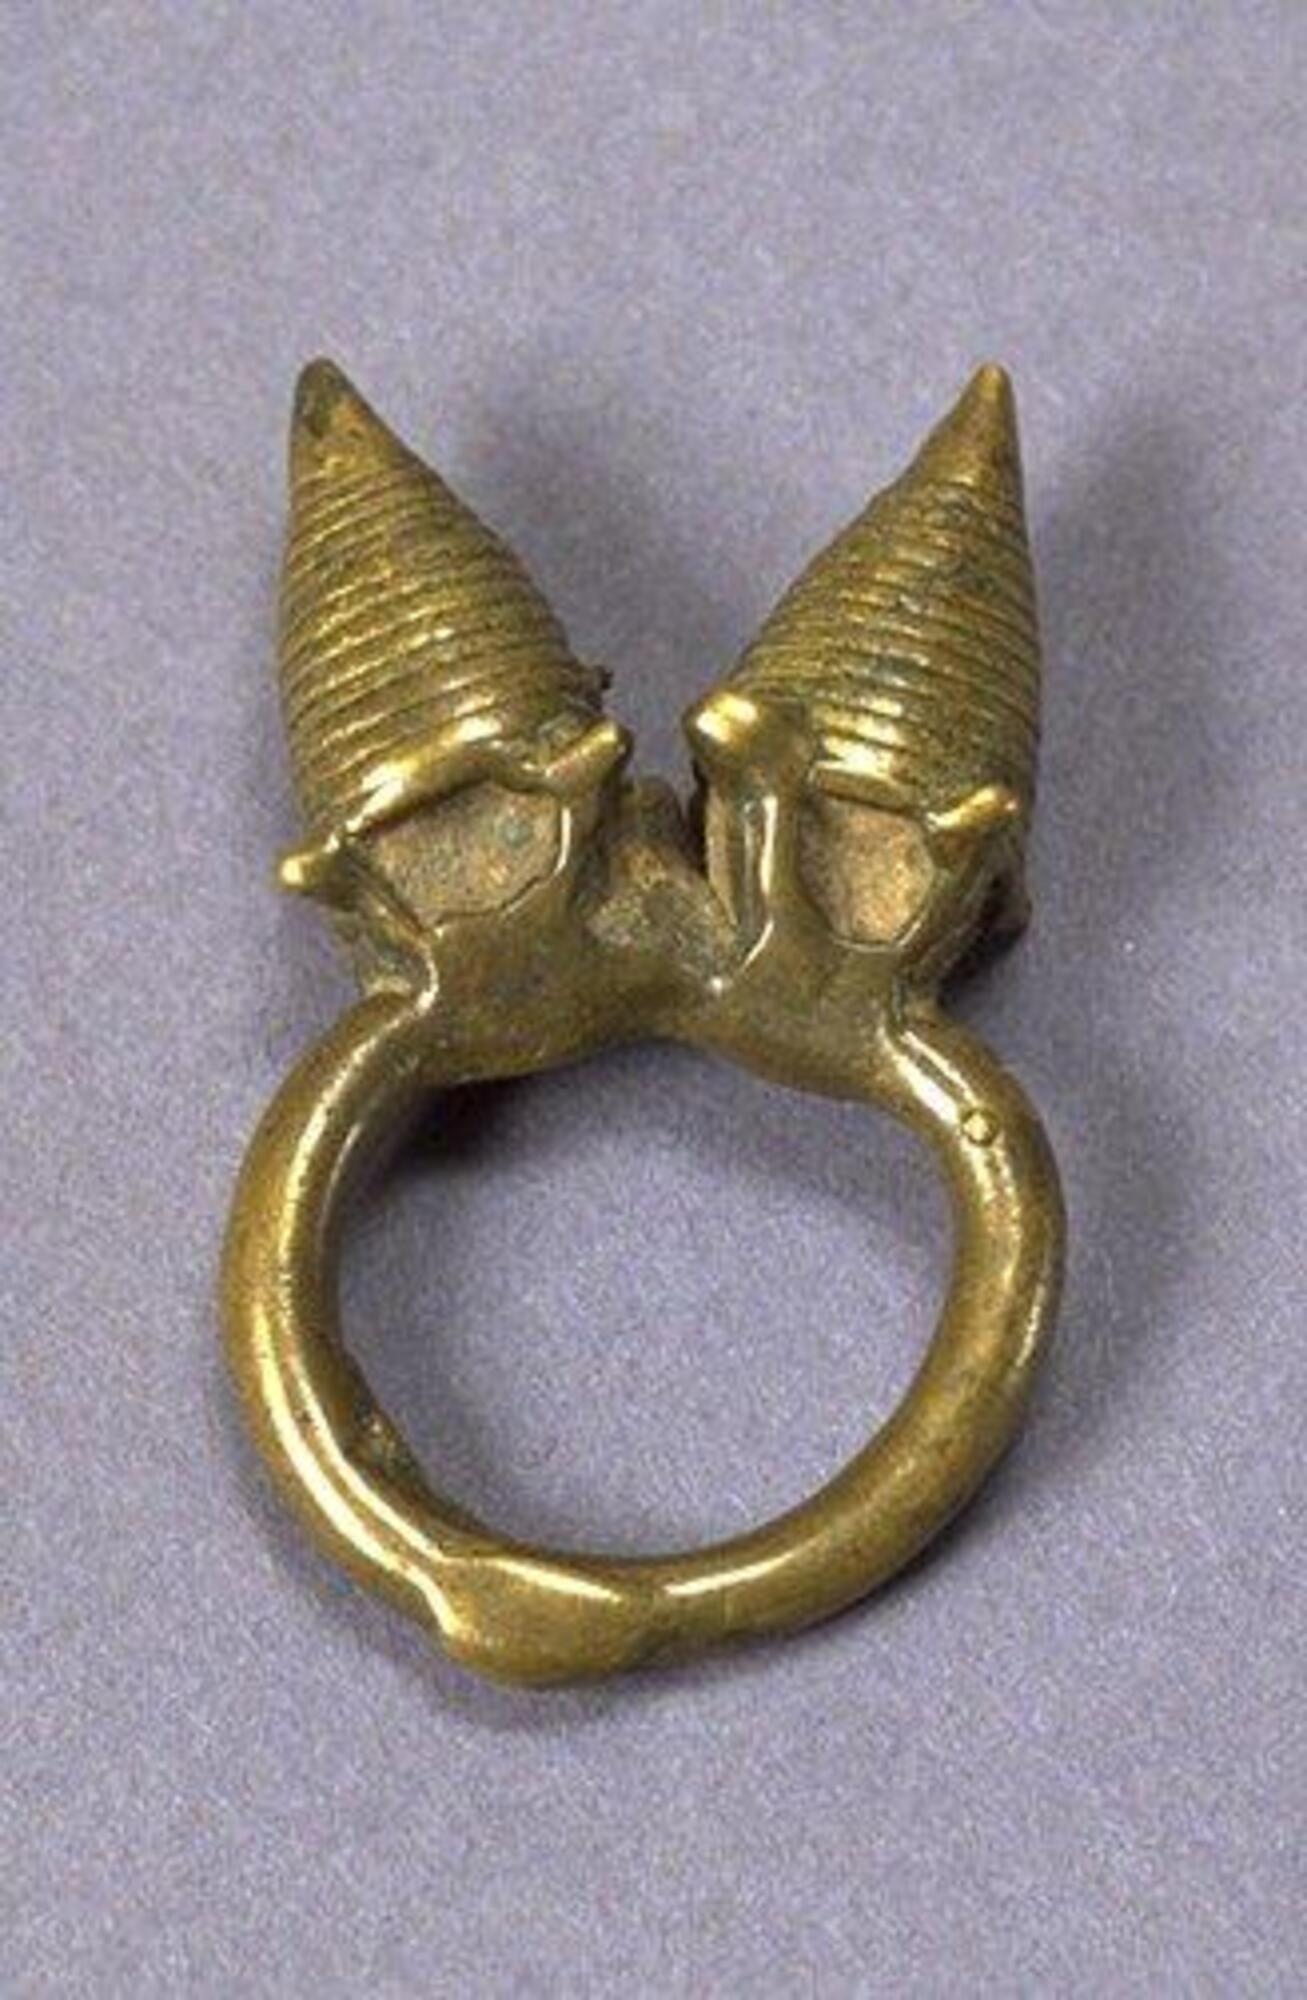 Ring with two conical projections, decorated with concentric horizontal grooves and a large loop.